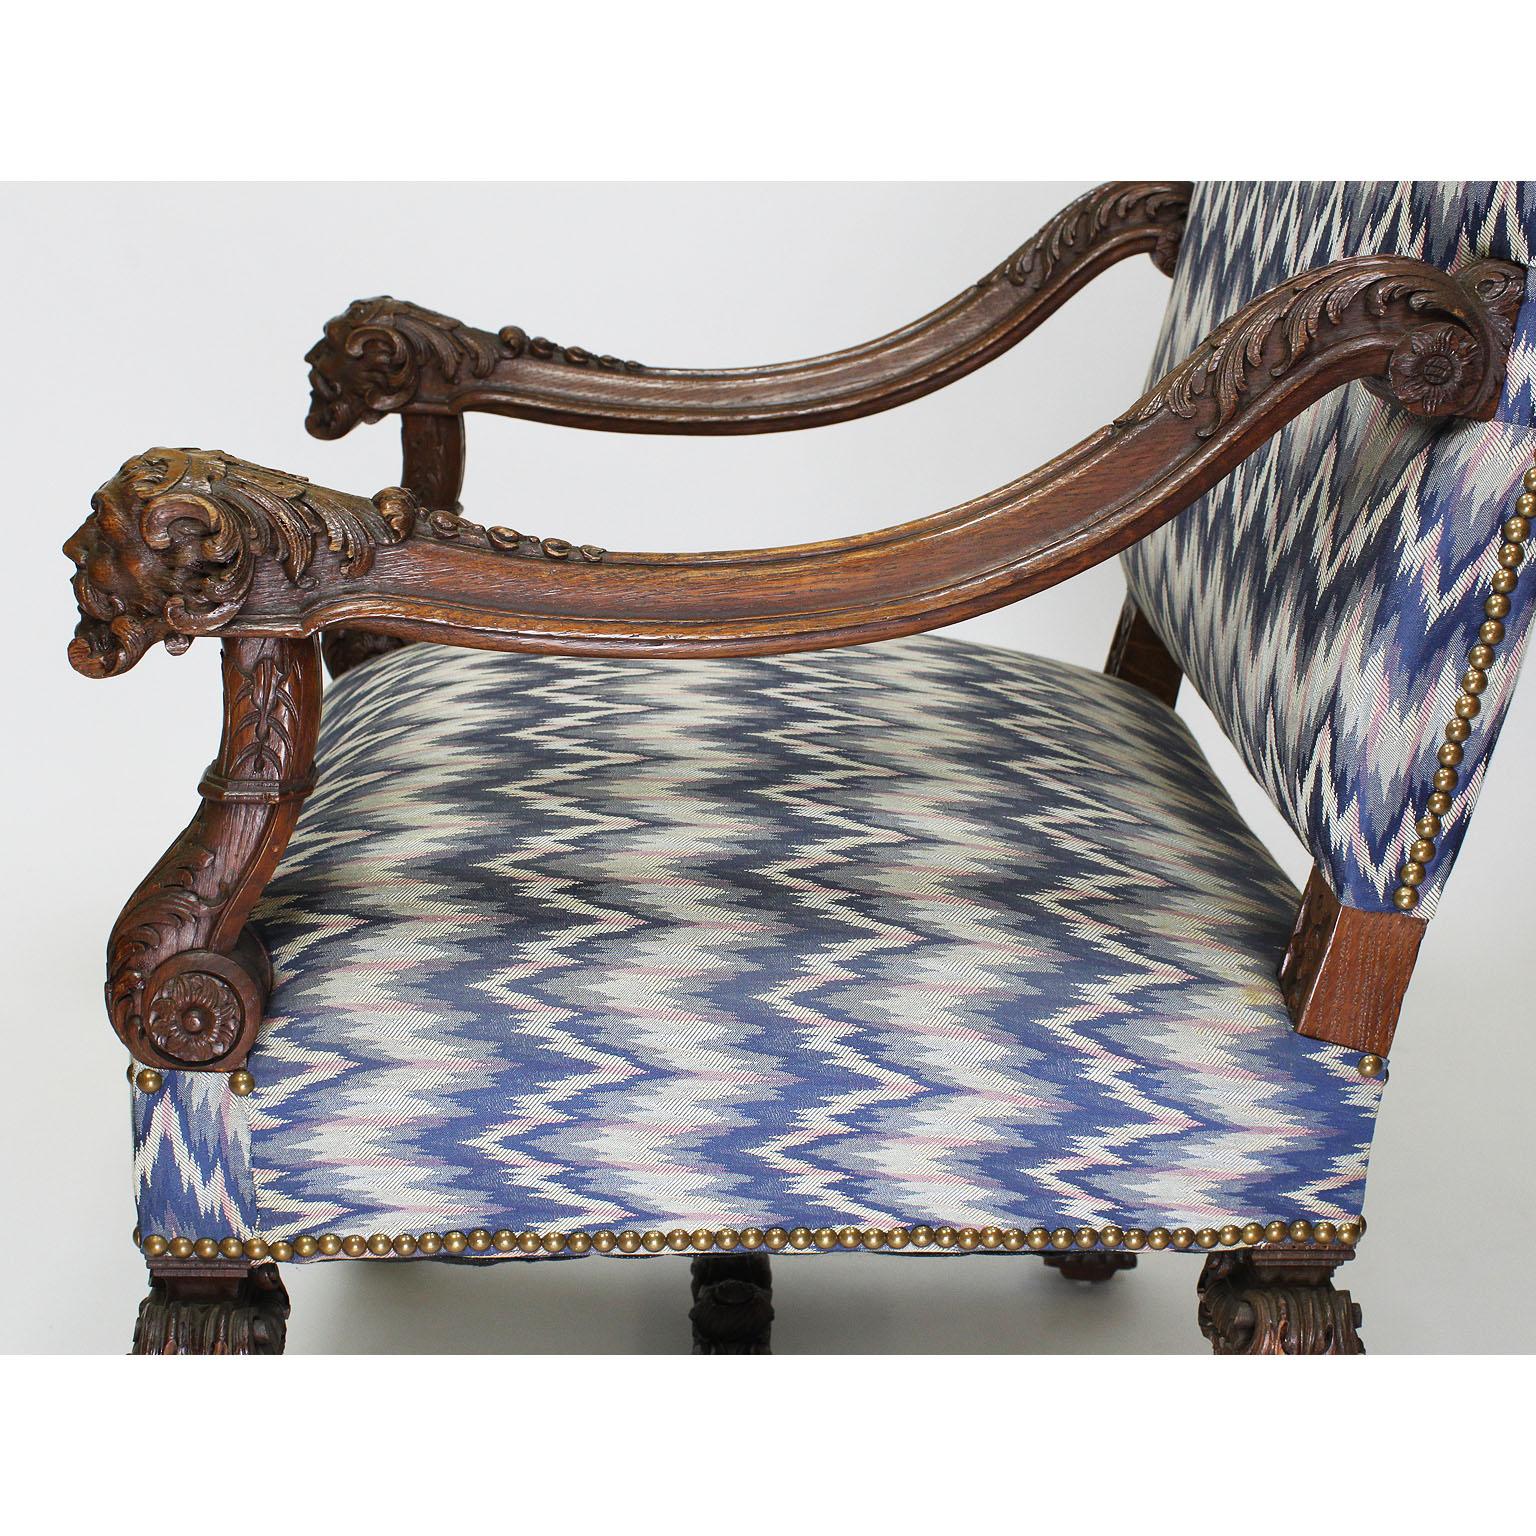 Fine French 19th Century Louis XIV Style Baroque Carved Walnut Throne Armchair For Sale 2